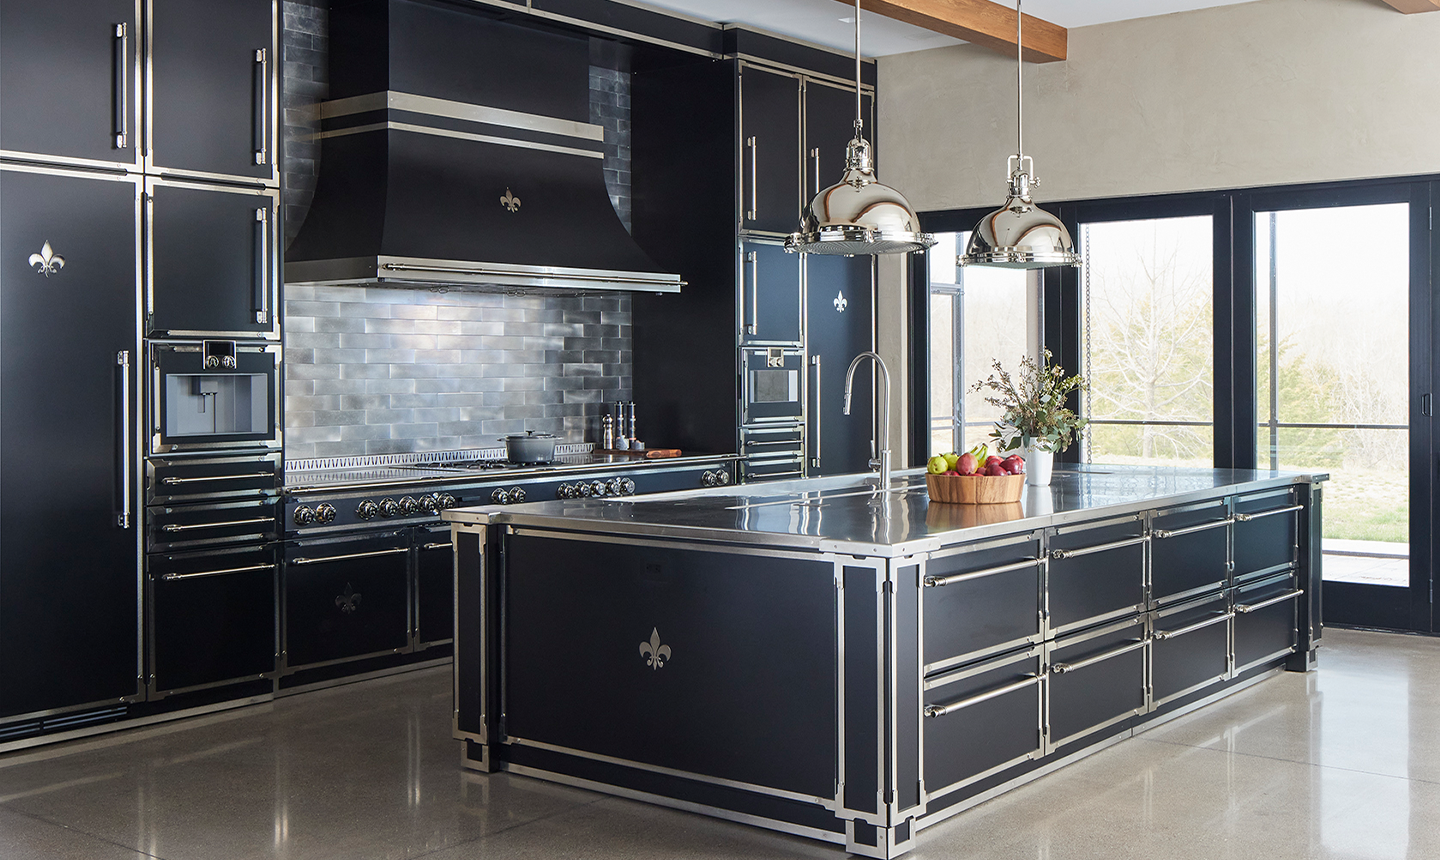 Black Kitchen Base Cabinet With Silver Handles and Countertop In the middle of the Kitchen. Black Classic Kitchen Ranges With a Hood and Black Kitchen Wall Cabinets